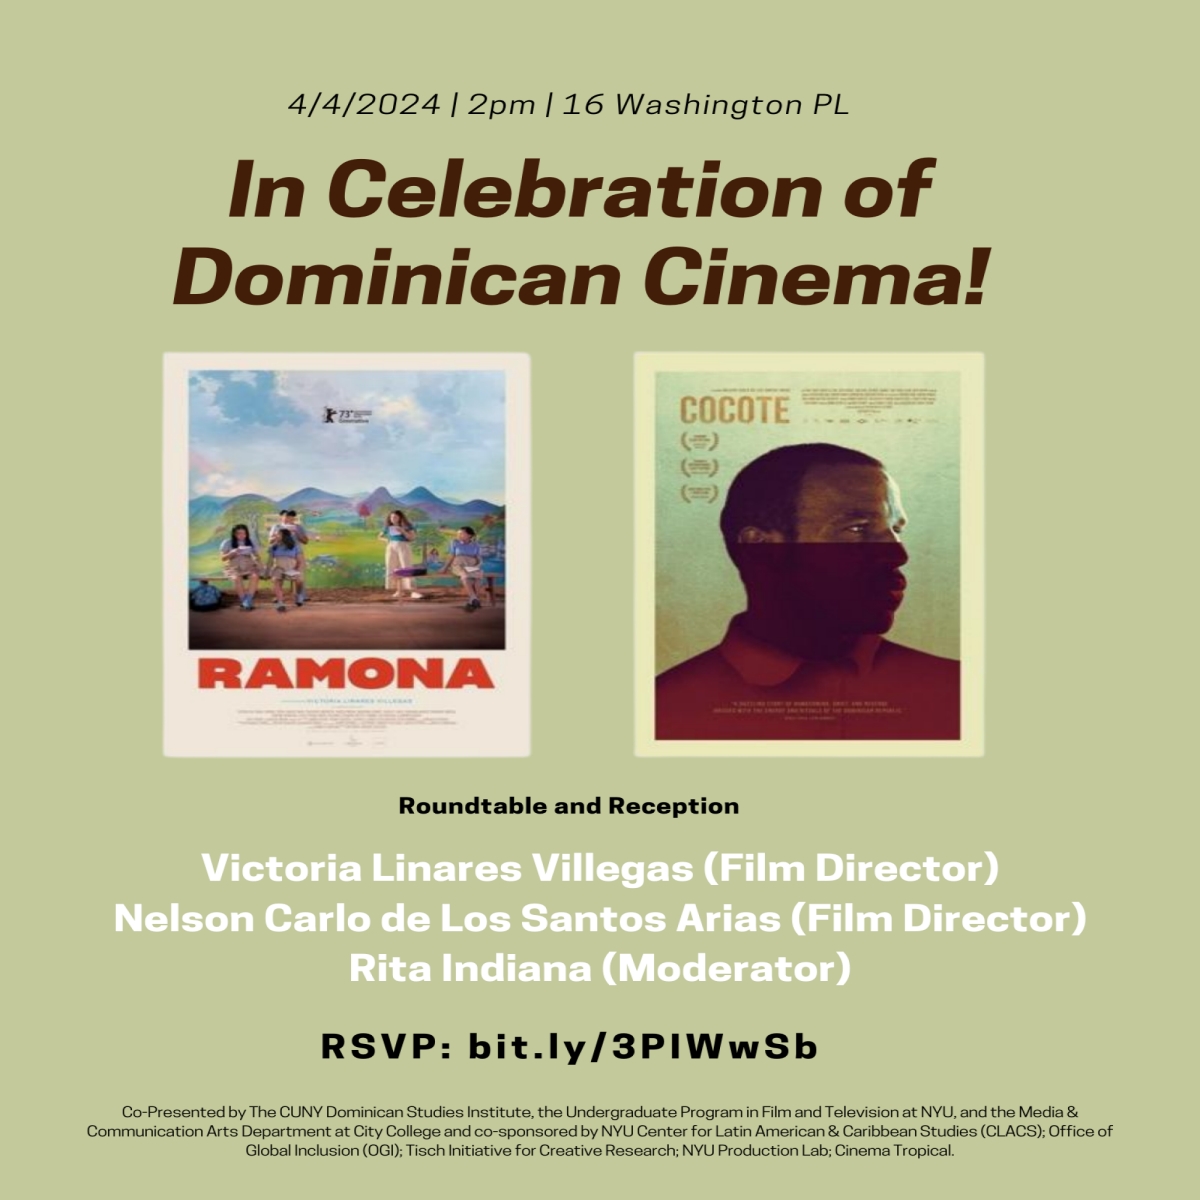 Flyer for In Celebration of Dominican Cinema event